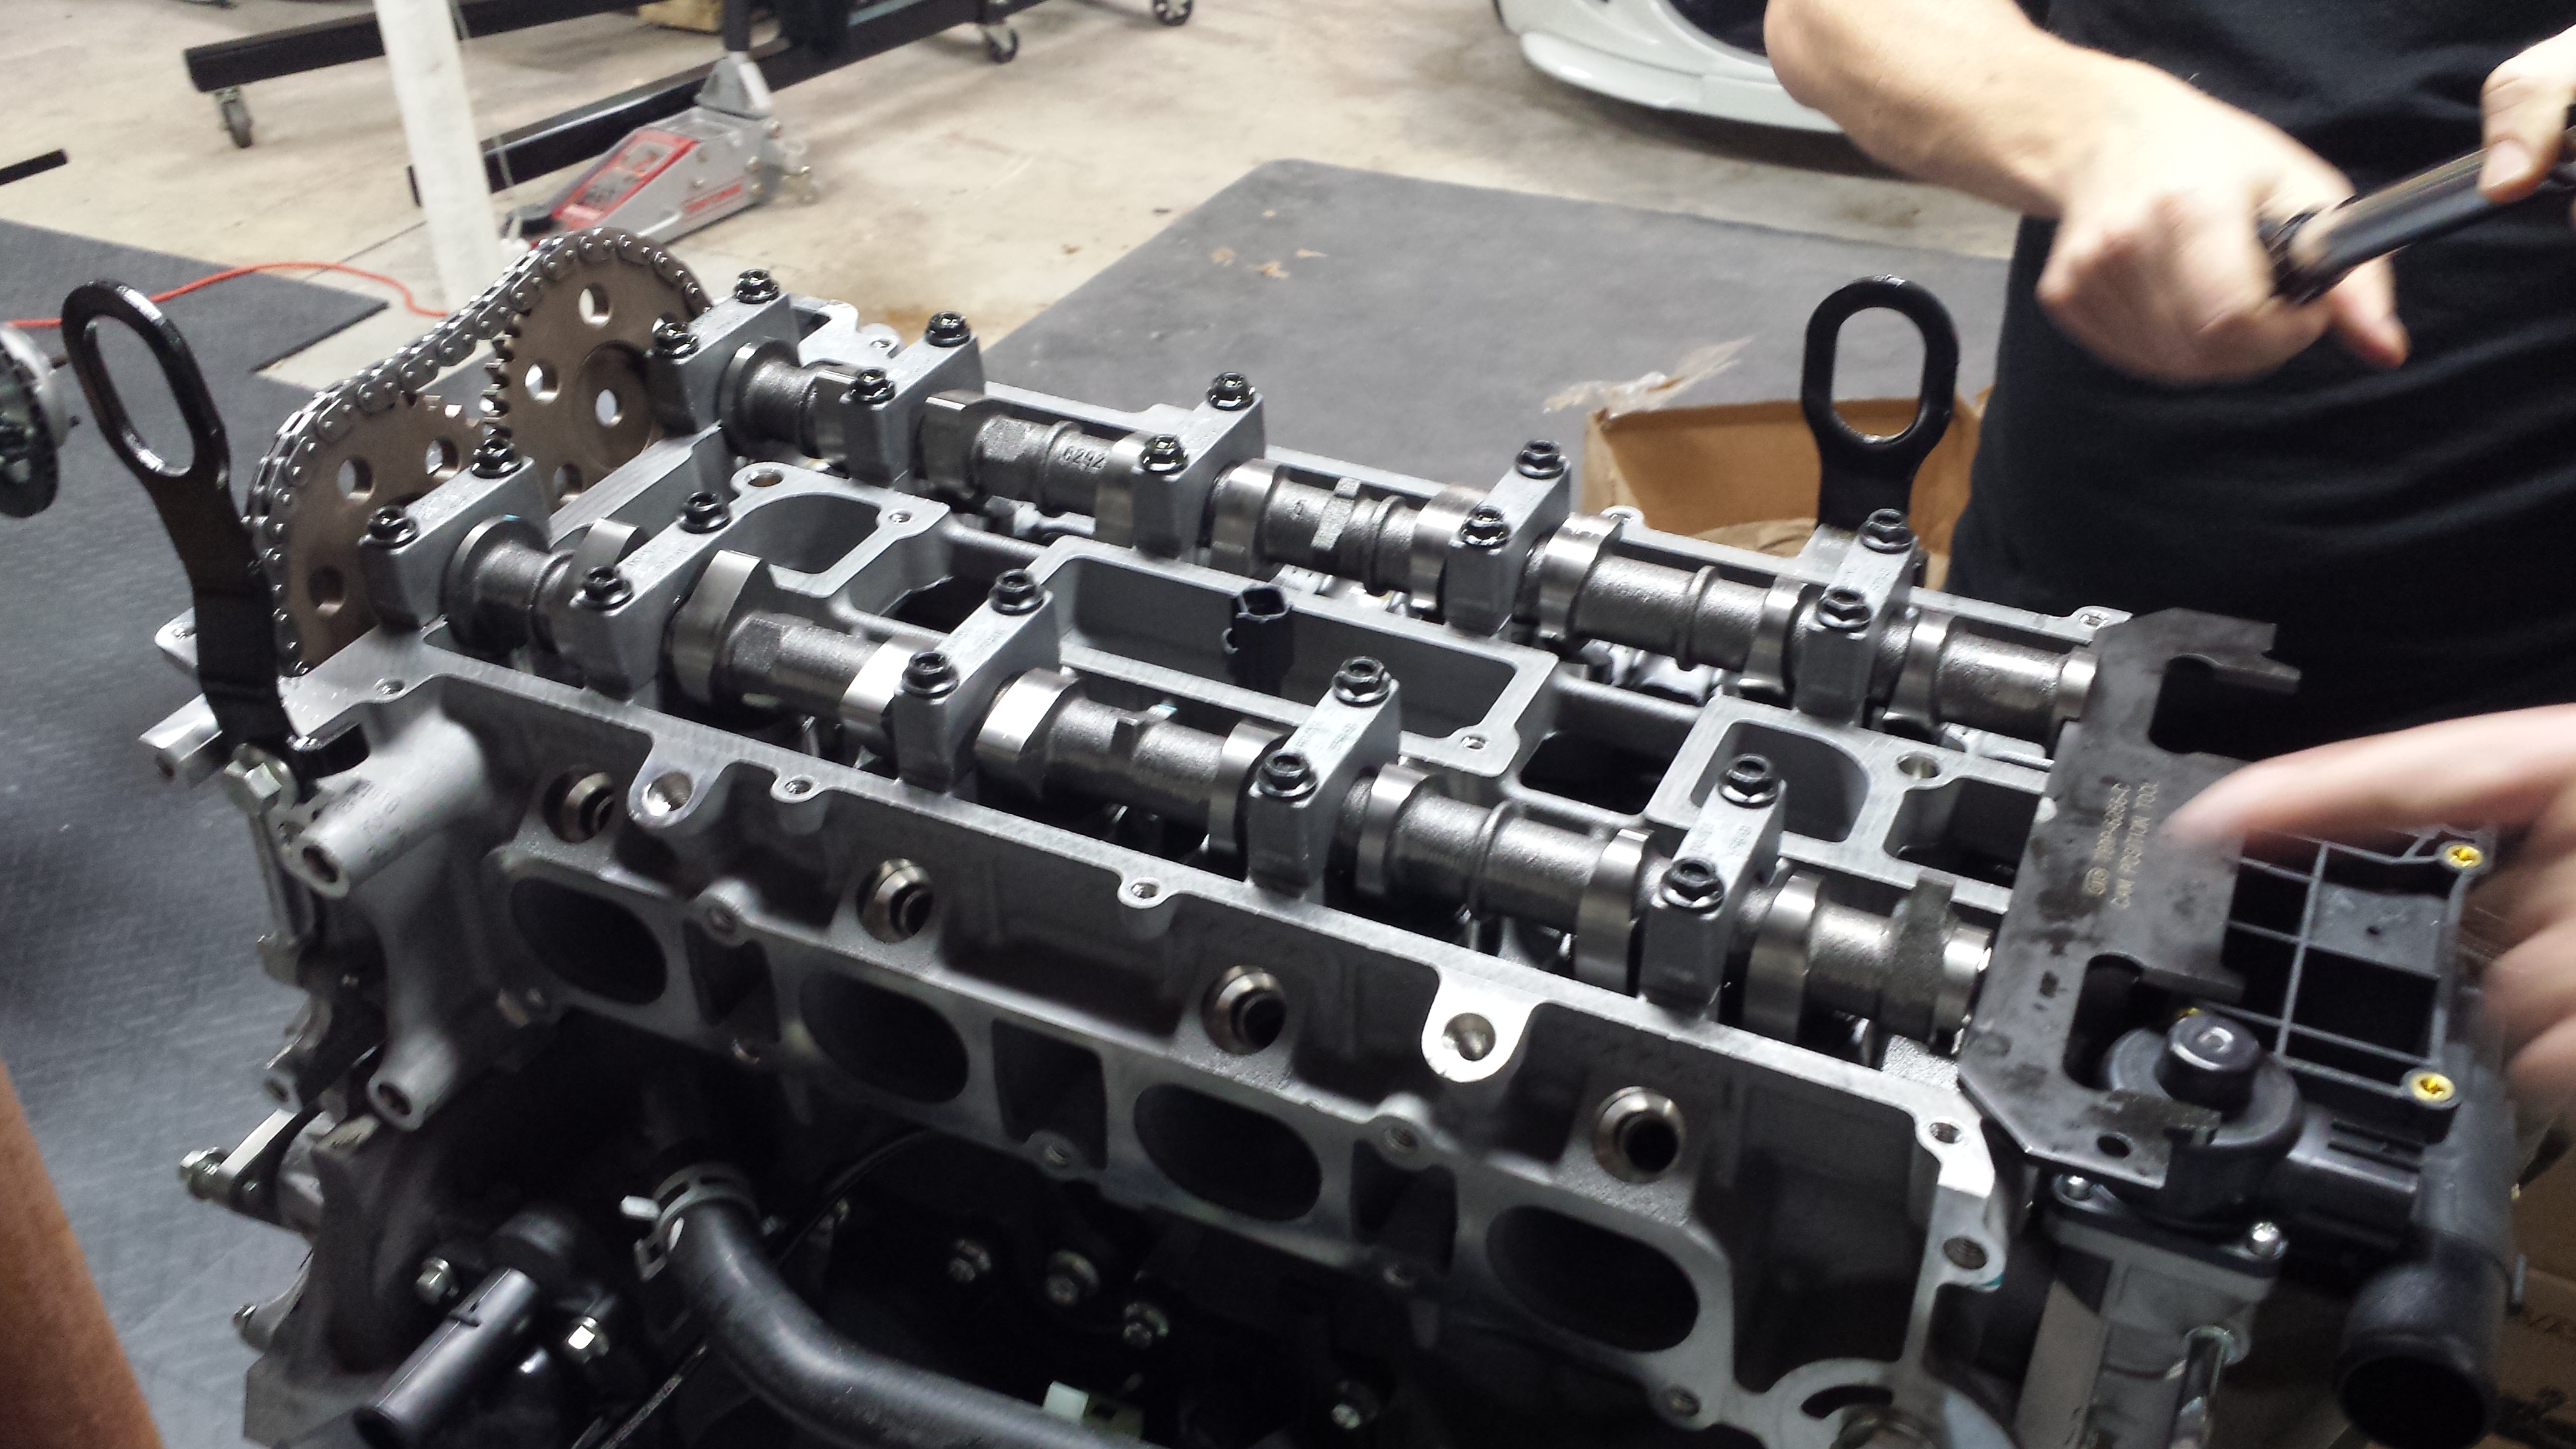 New camshaft in